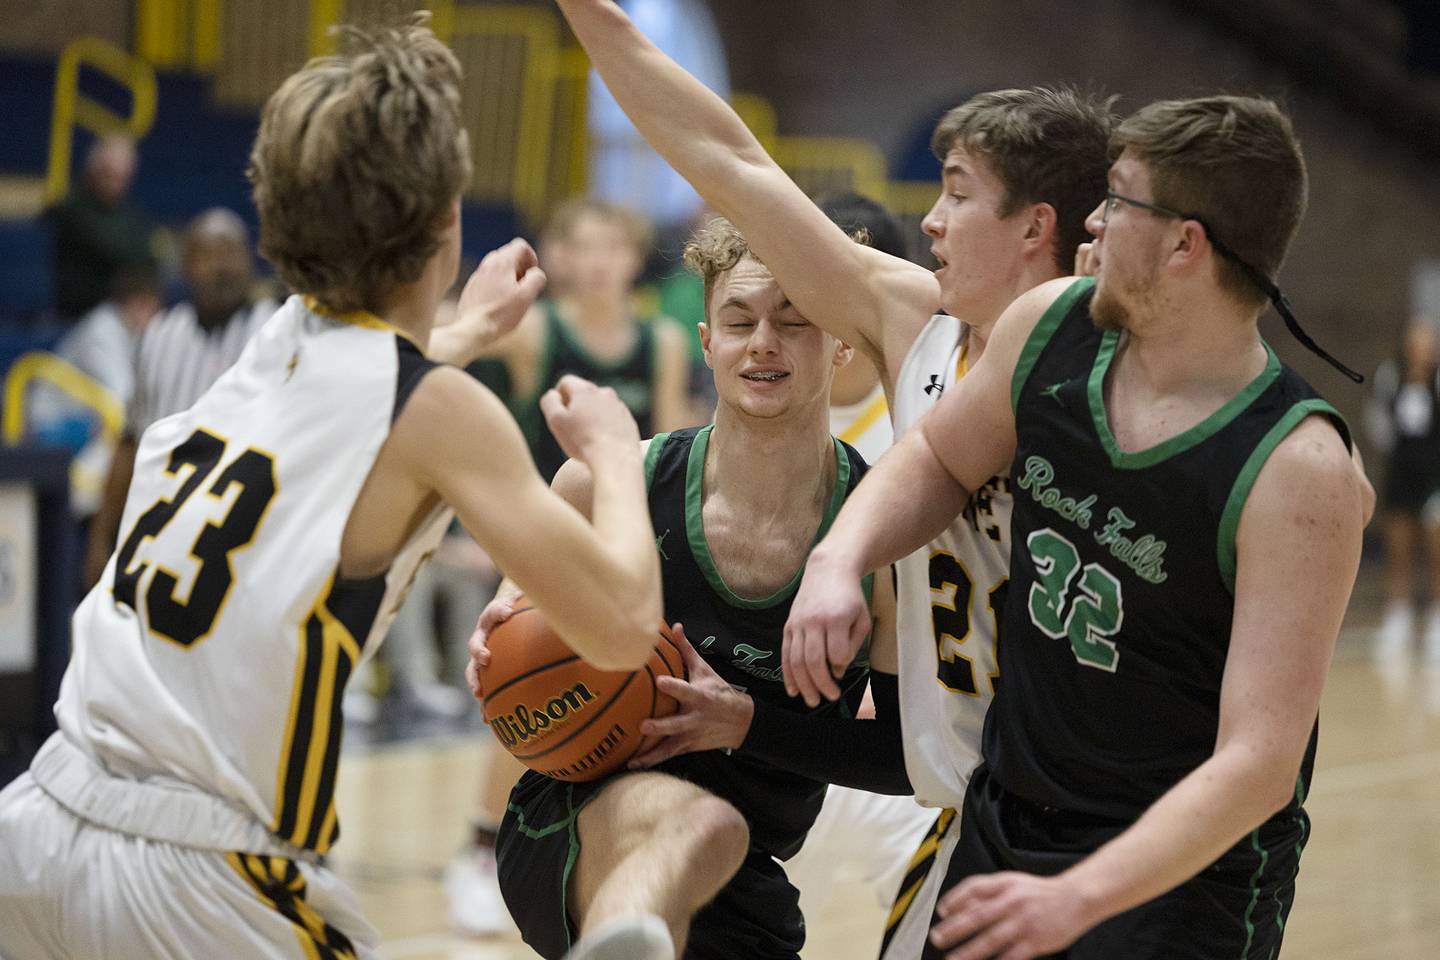 Rock Falls’ Gavin Sands works in the lane agains Hinsdale South Monday, Jan. 10, 2023 at Sterling High School’s MLK Classic basketball tournament.